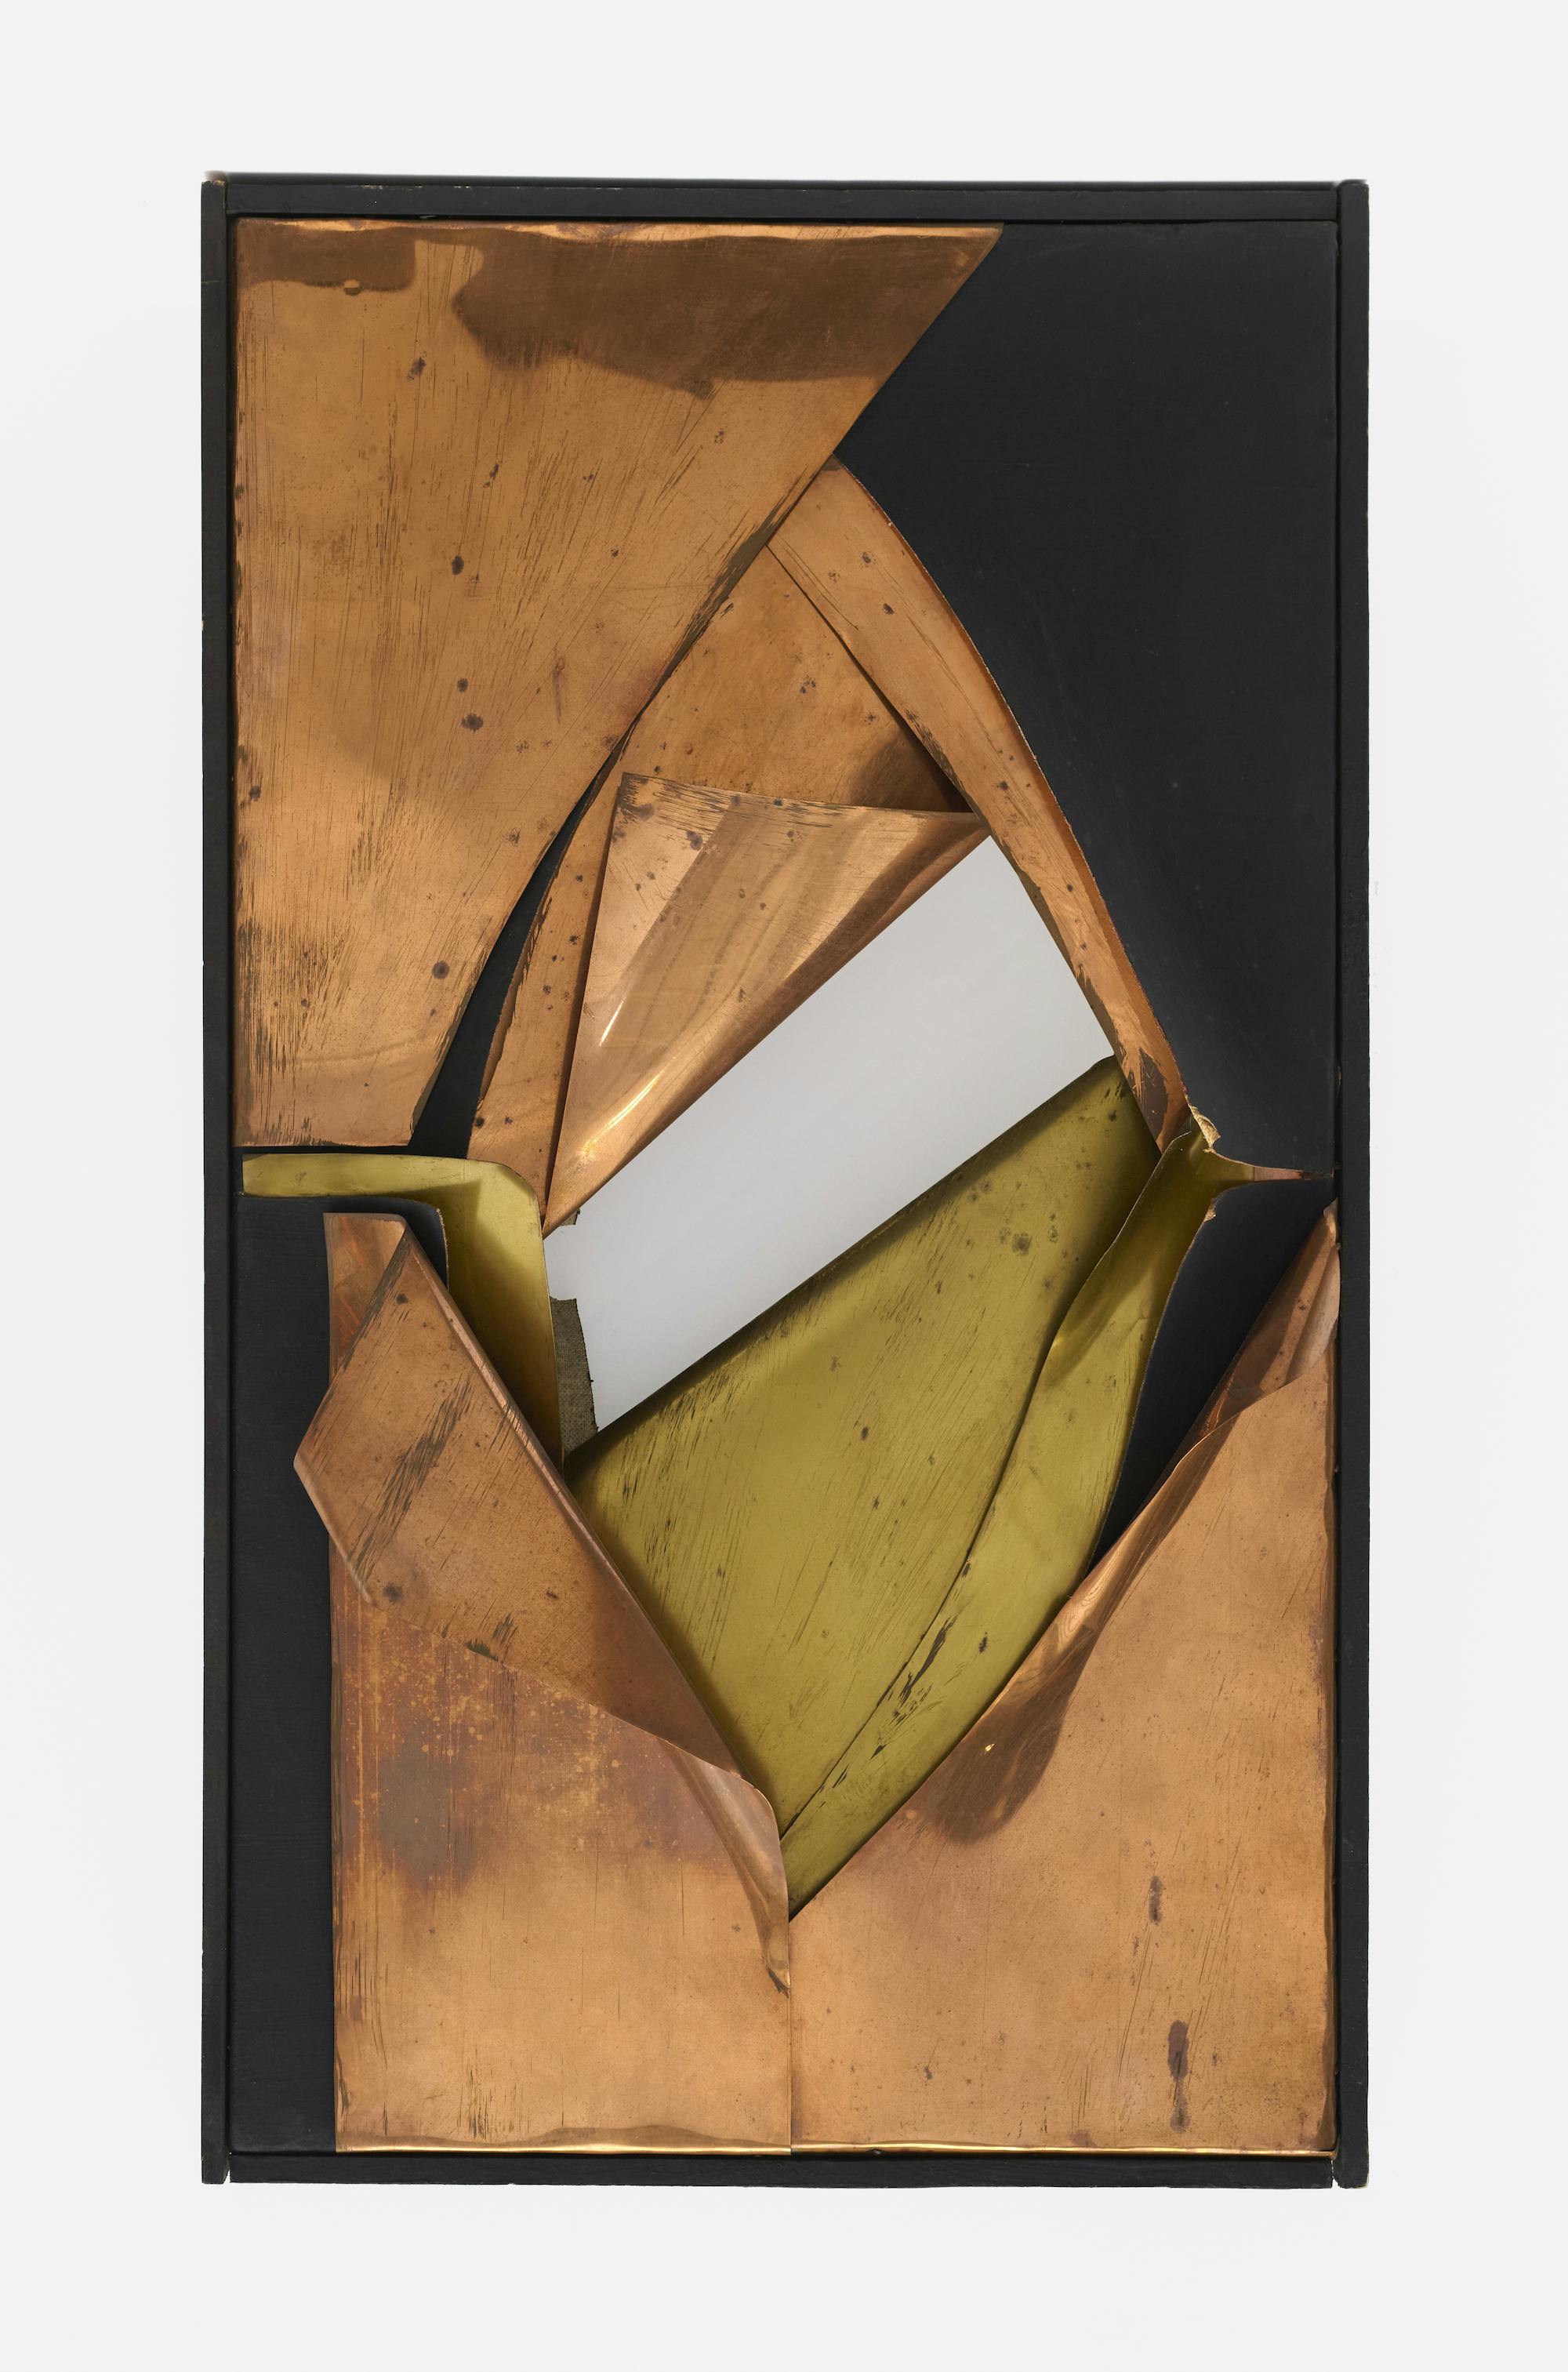 A tall rectangular artwork is displayed against a white wall. Inside the frame, several layers of bronzed sheet metal and one layer of black-painted canvas have been cut away or folded back to reveal a diamond-shaped gap in the center of the work, which gradually narrows through the layers into a small diagonal strip of empty space, through which the wall behind the work is visible.